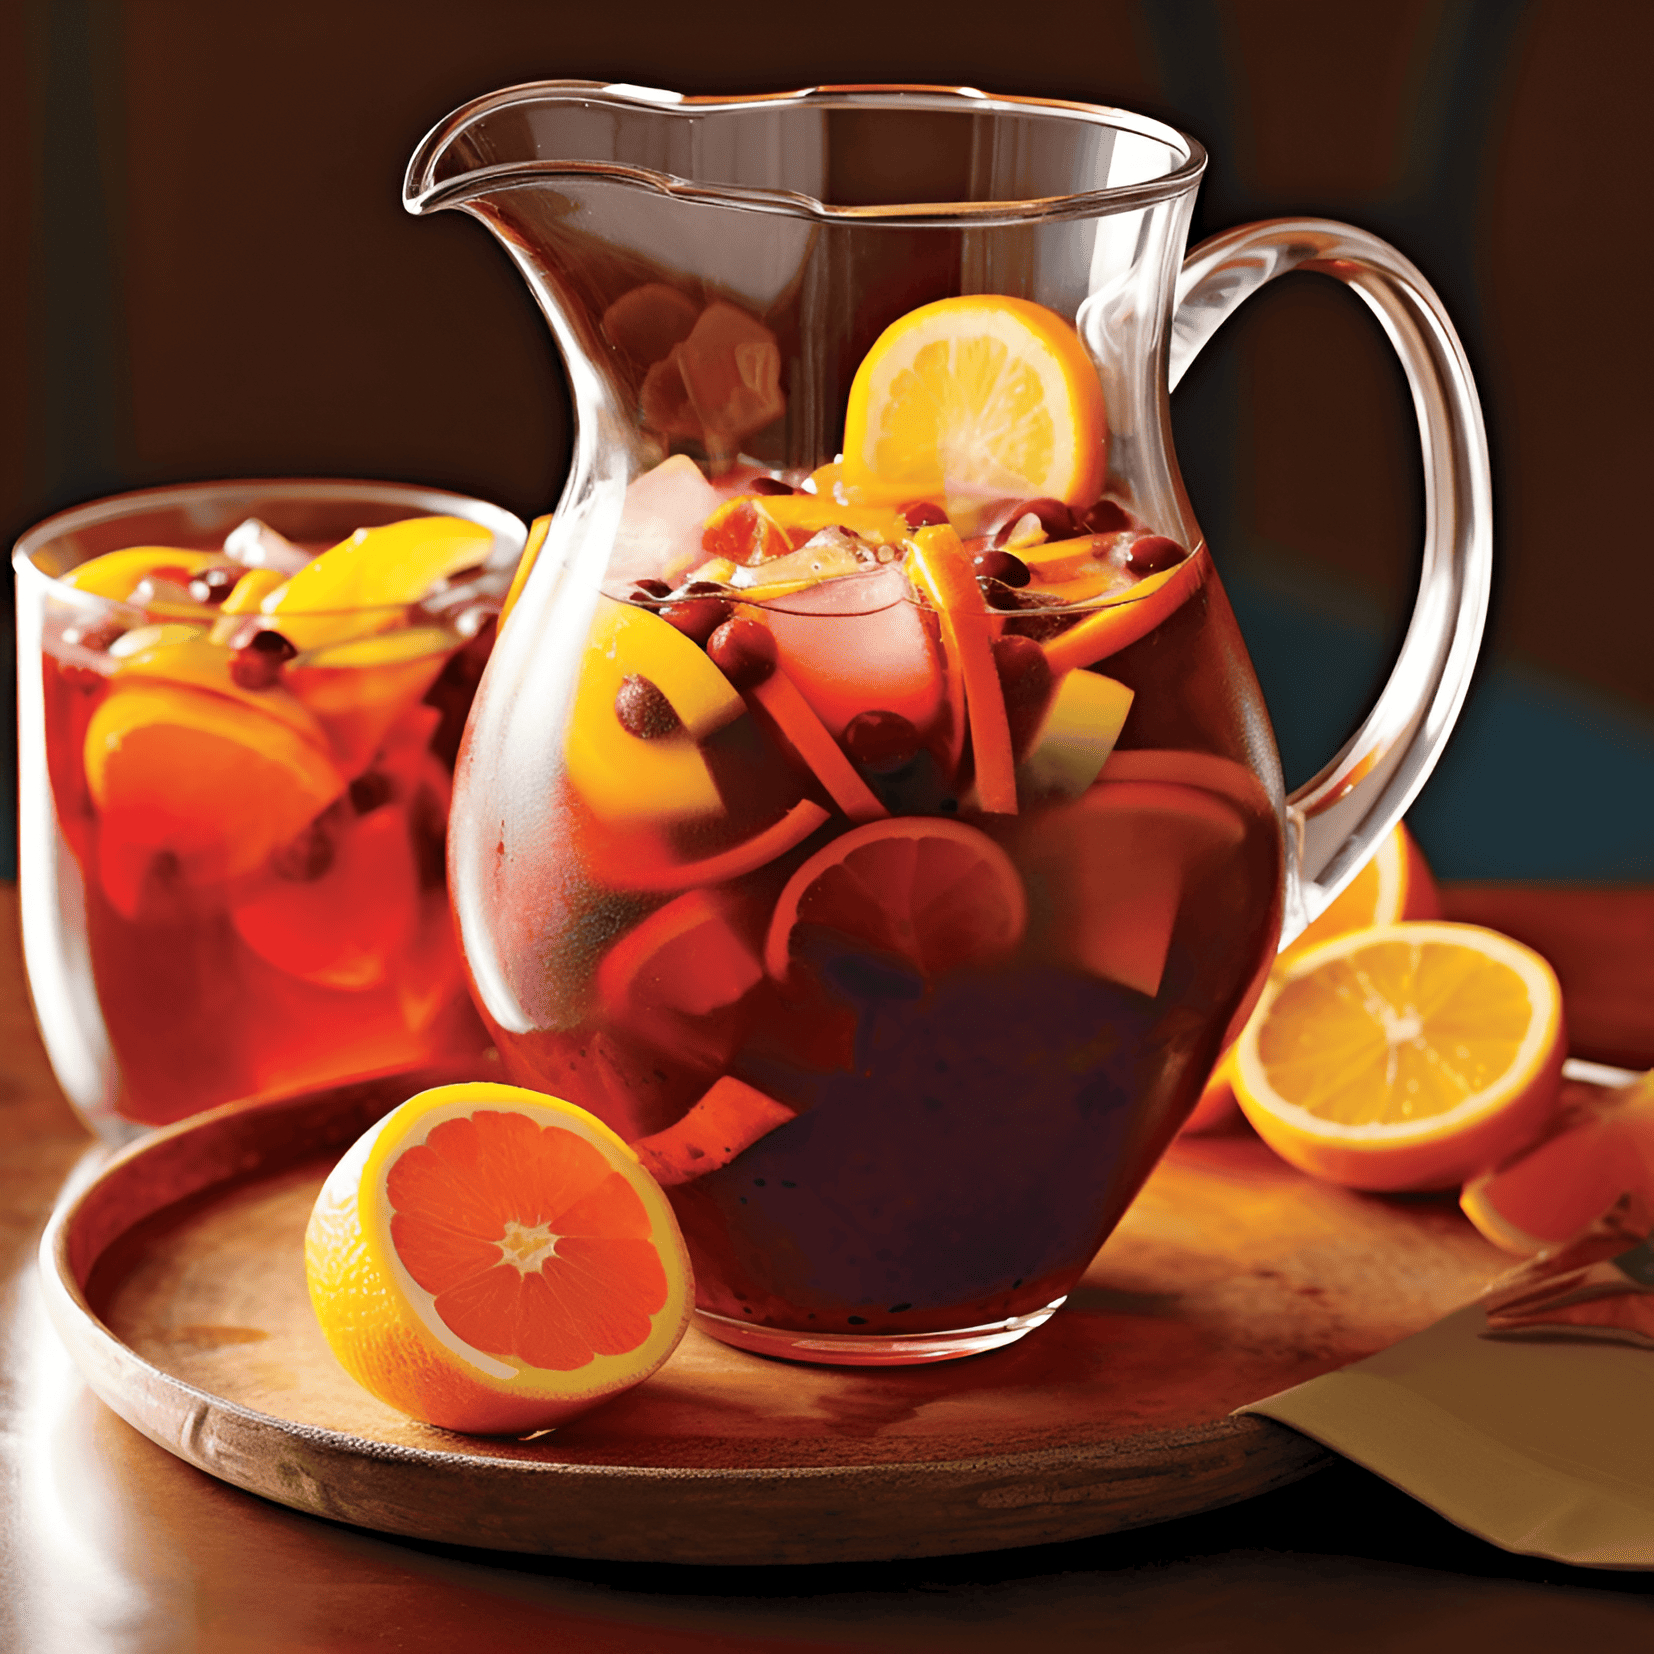 Sangria is a fruity, refreshing, and slightly sweet cocktail with a hint of tartness from the citrus fruits. It is well-balanced, with the wine and fruit flavors complementing each other perfectly.